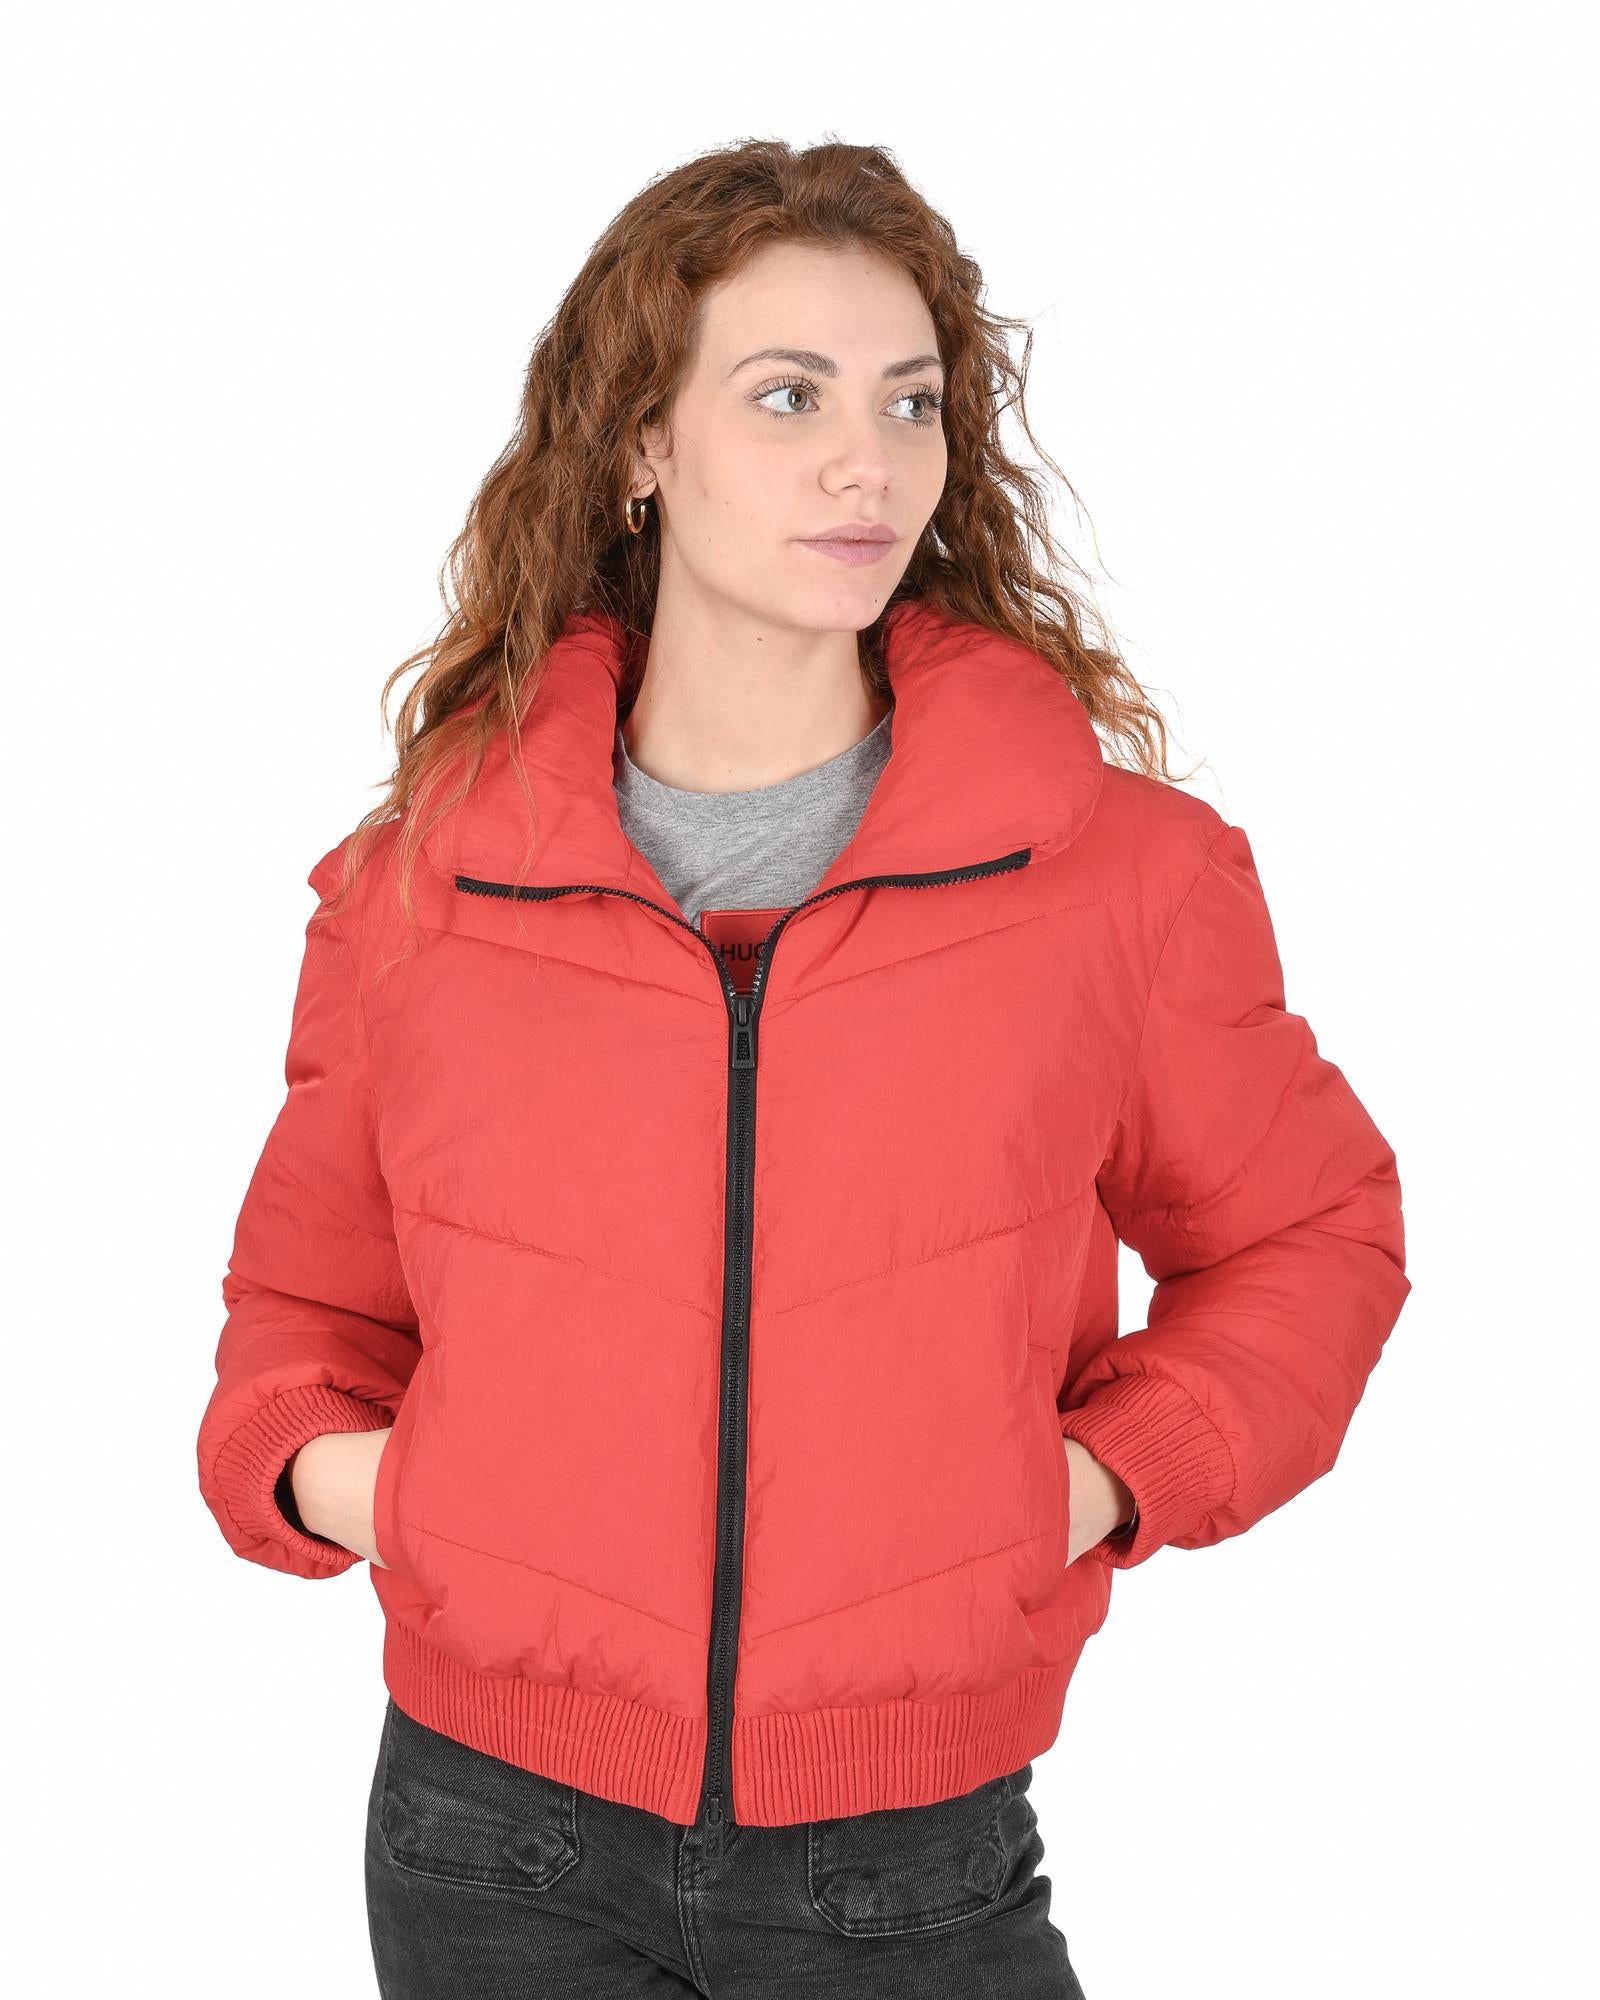 Women's Red Polyamide Jacket in Red - XS